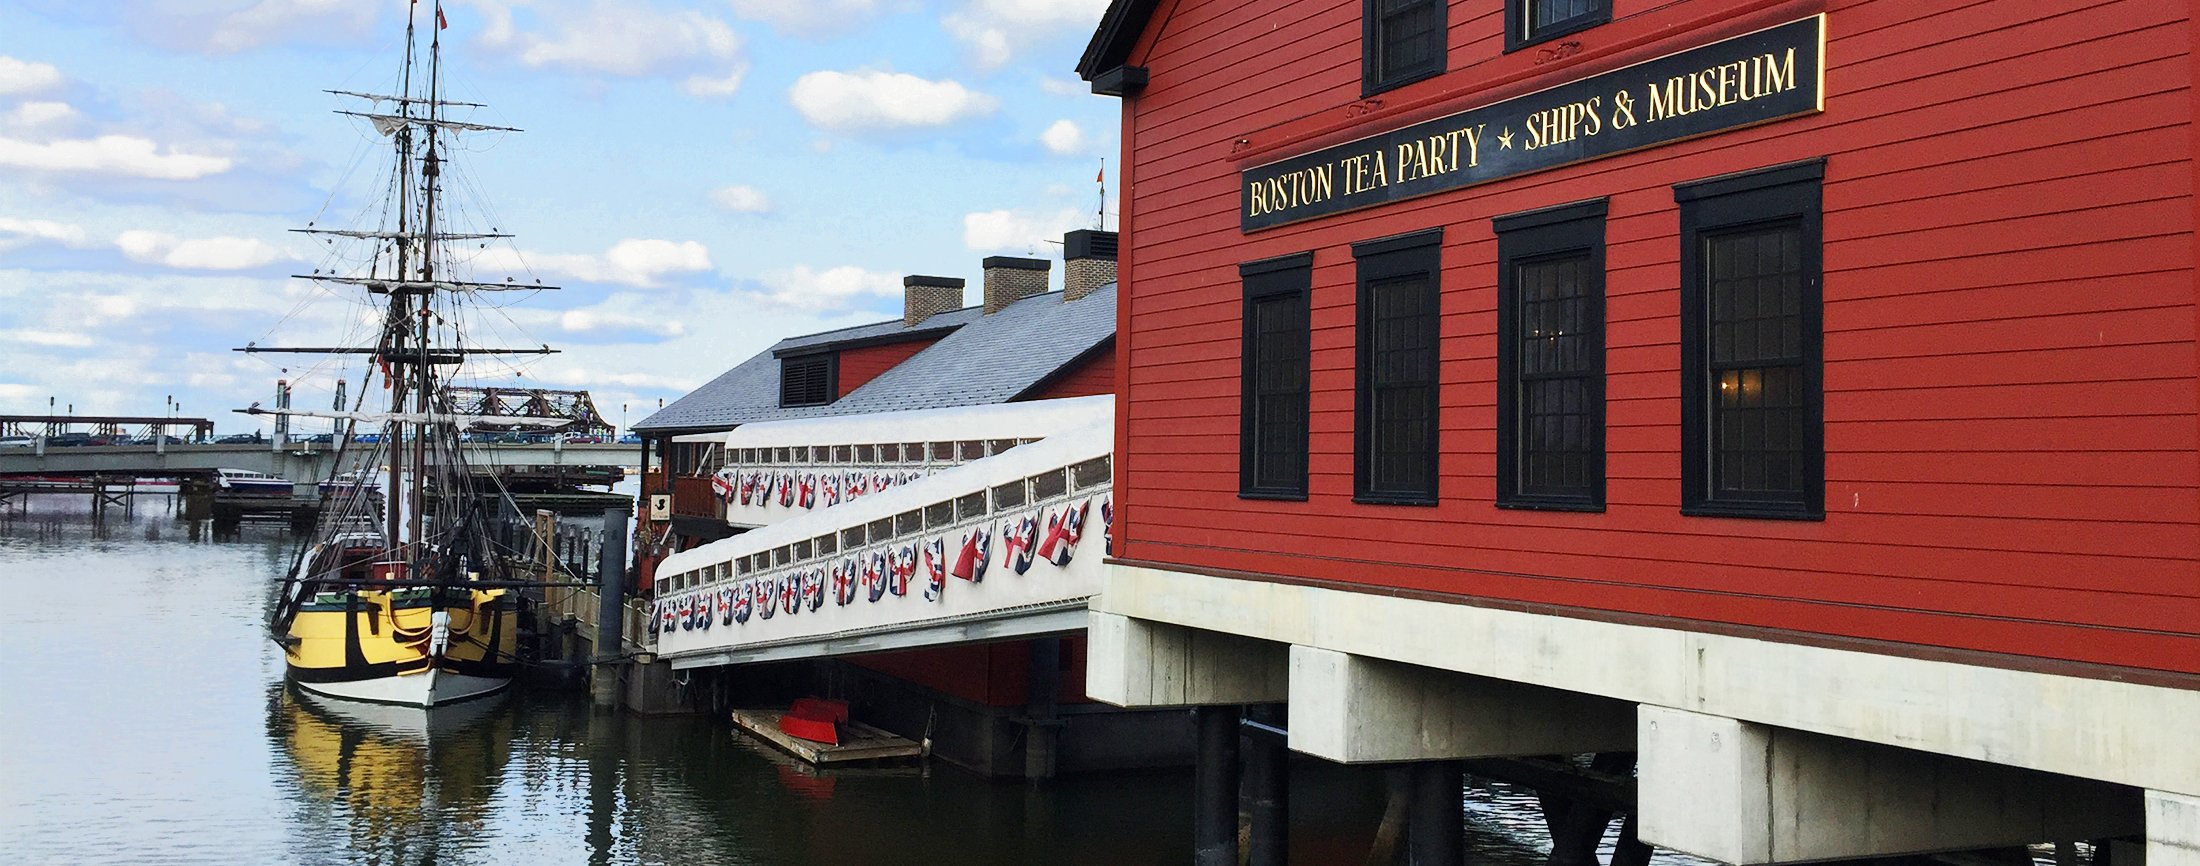 Boston Tea Party Ships & Museum Named Best Patriotic Attraction